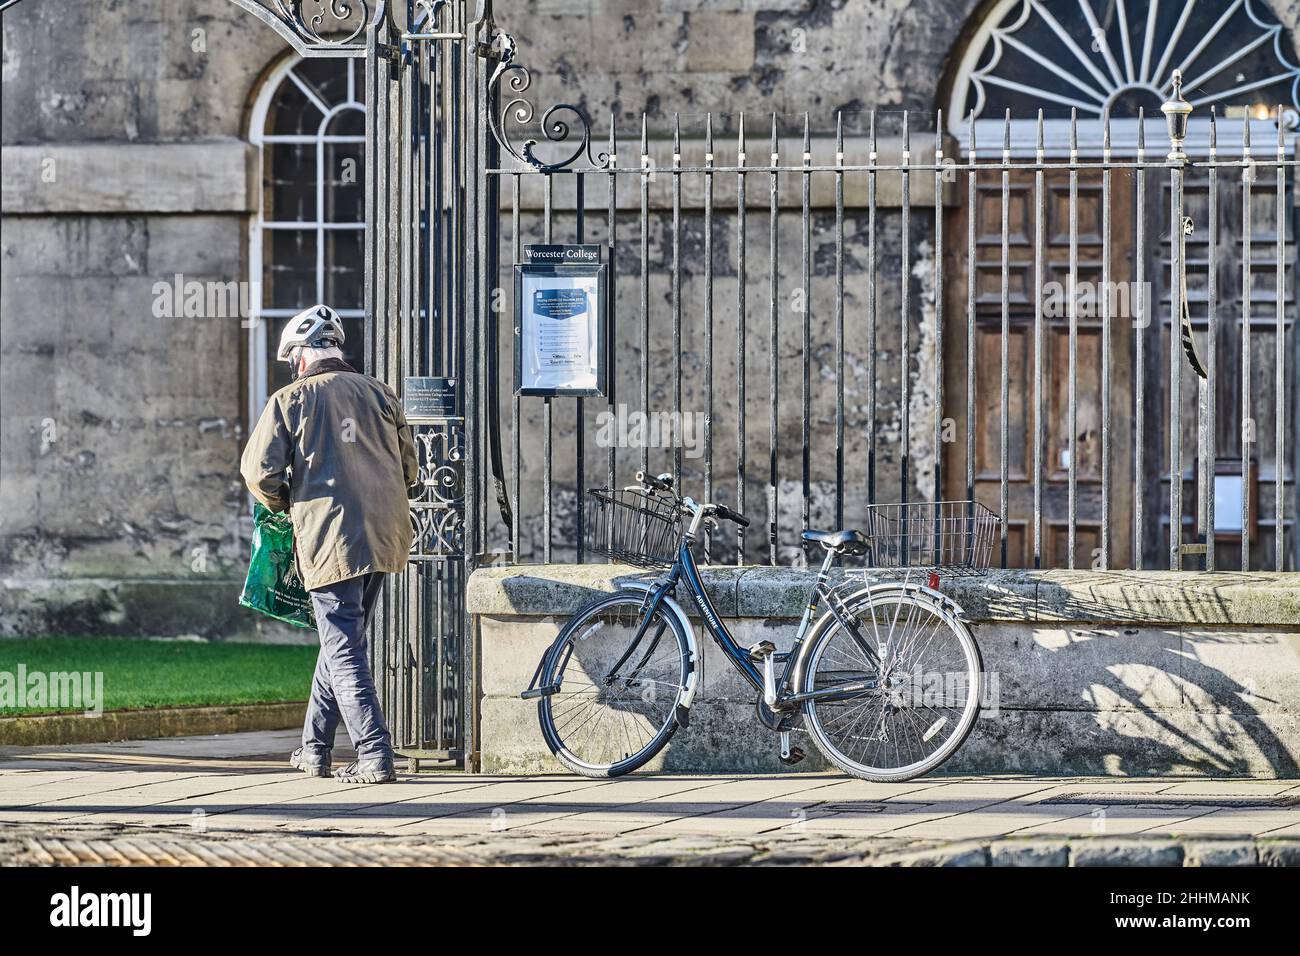 A fellow parks his bicycle on the rails and walks into Worcester college, university of Oxford, England. Stock Photo